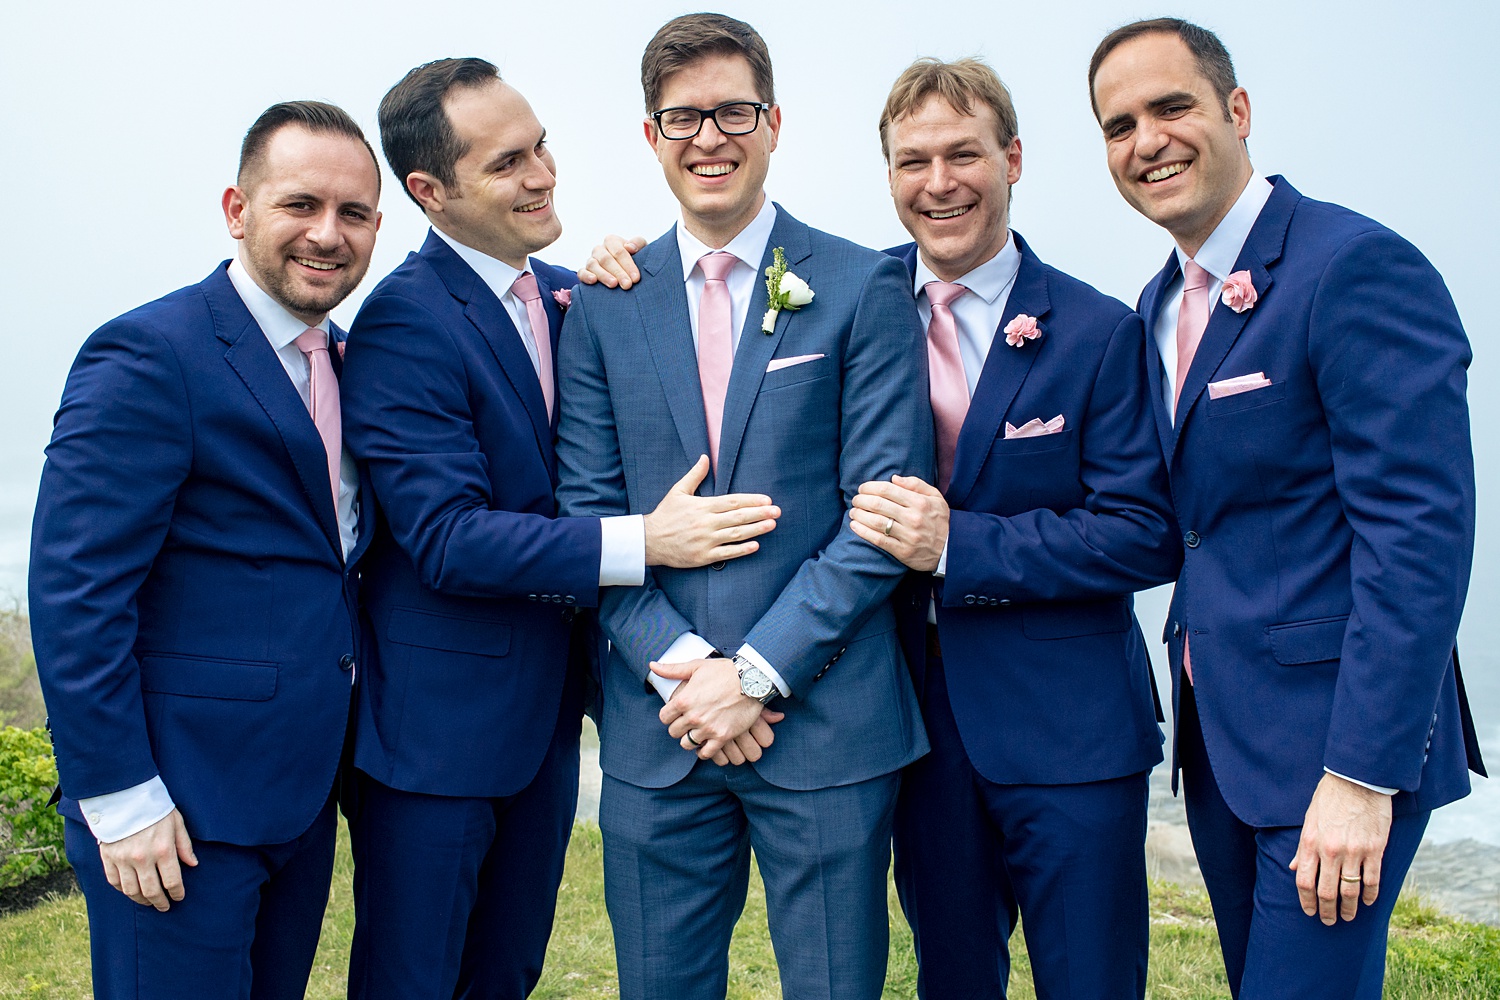 The groom and the groomsmen share a moment on the hazy wedding day